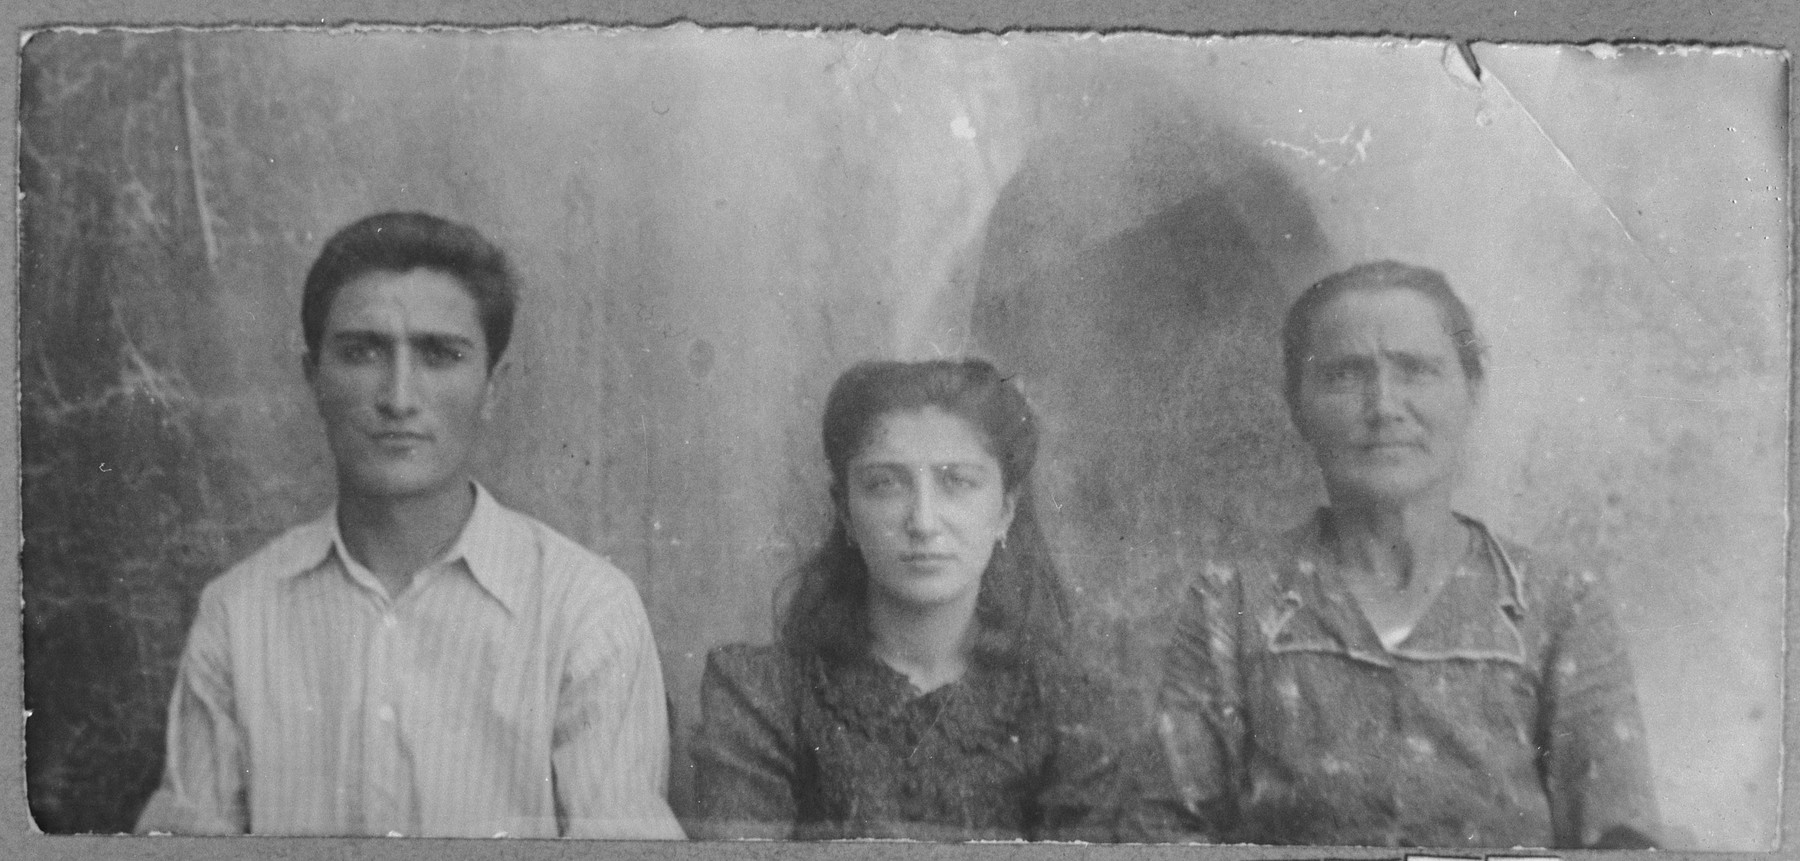 Portrait of Sol Hasson, wife of Avram Hasson, Isak Hasson, son of Avram, and Rahel Hasson, daughter of Avram.  Isak was a tailor and Rahel, a student.  They lived at Sinagogina 6 in Bitola.